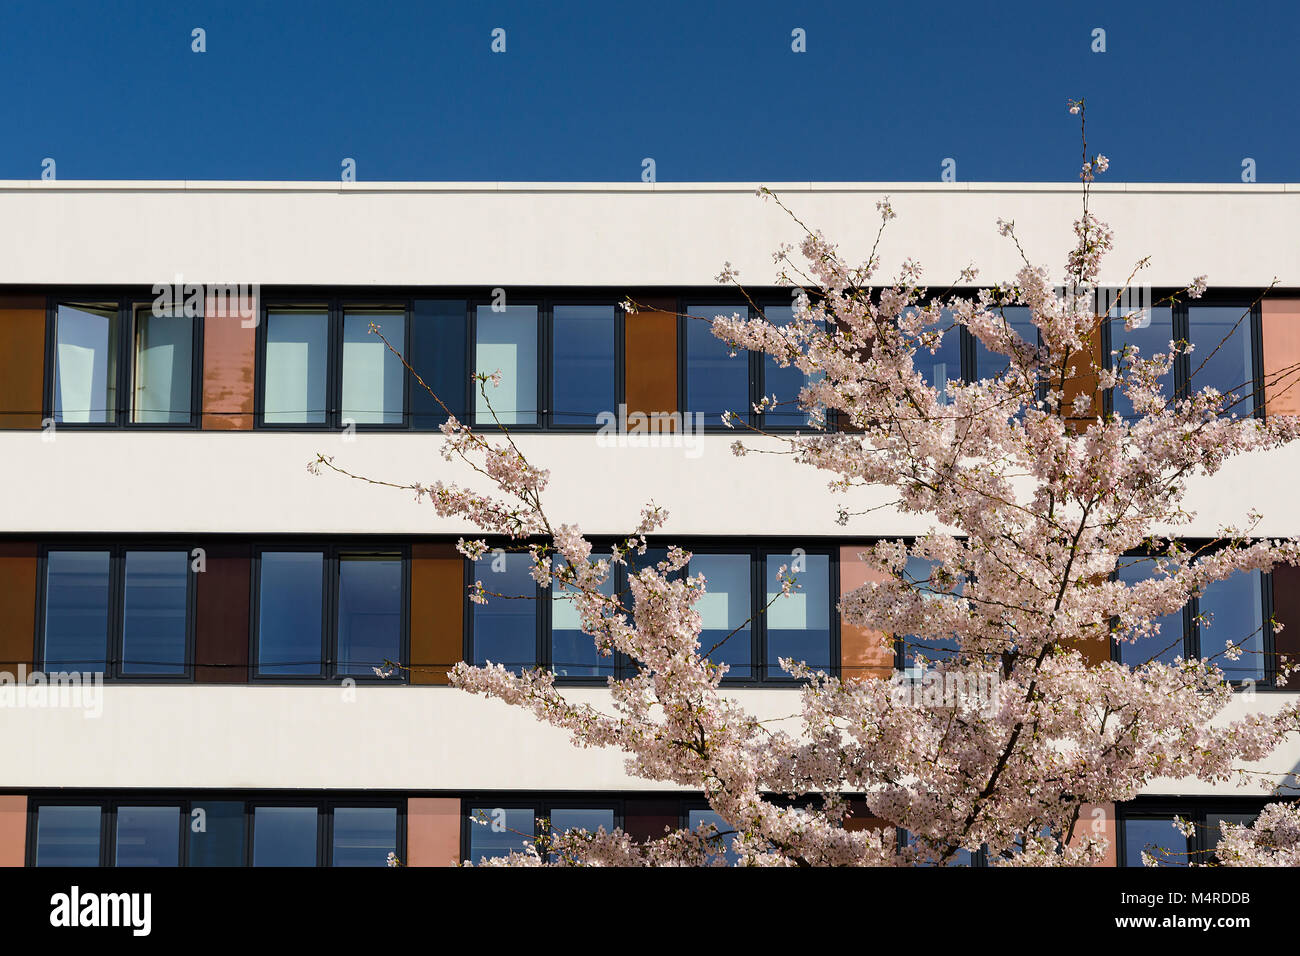 Facade of modern office building with spring blossoming apple tree in courtyard and blue sky reflection in windows Stock Photo